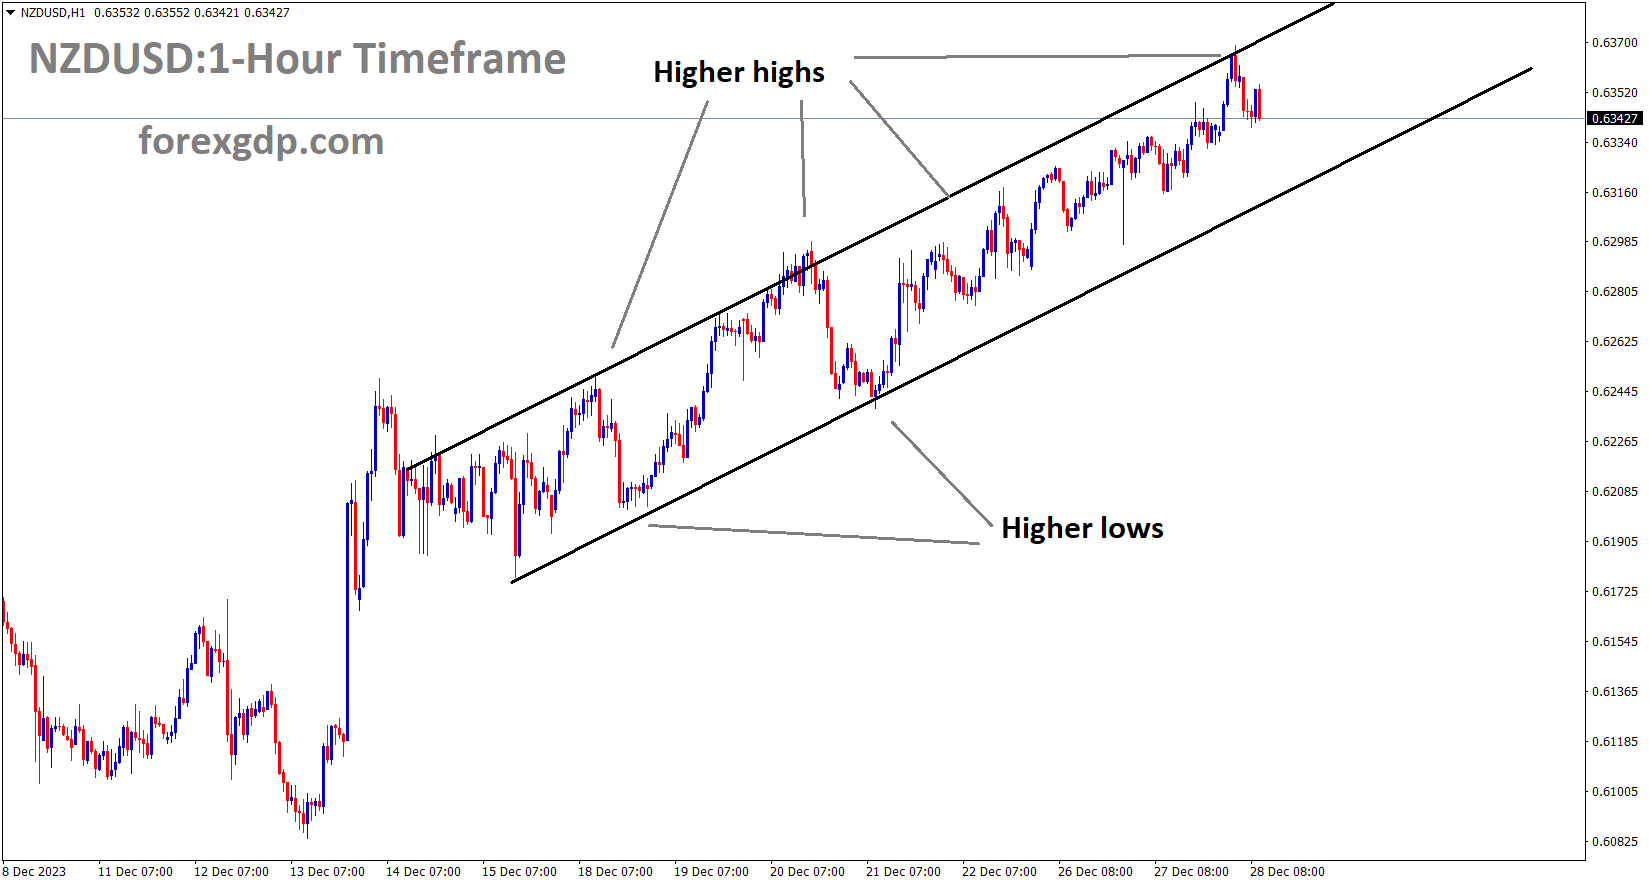 NZDUSD is moving in an Ascending channel and the market has fallen from the higher high area of the channel